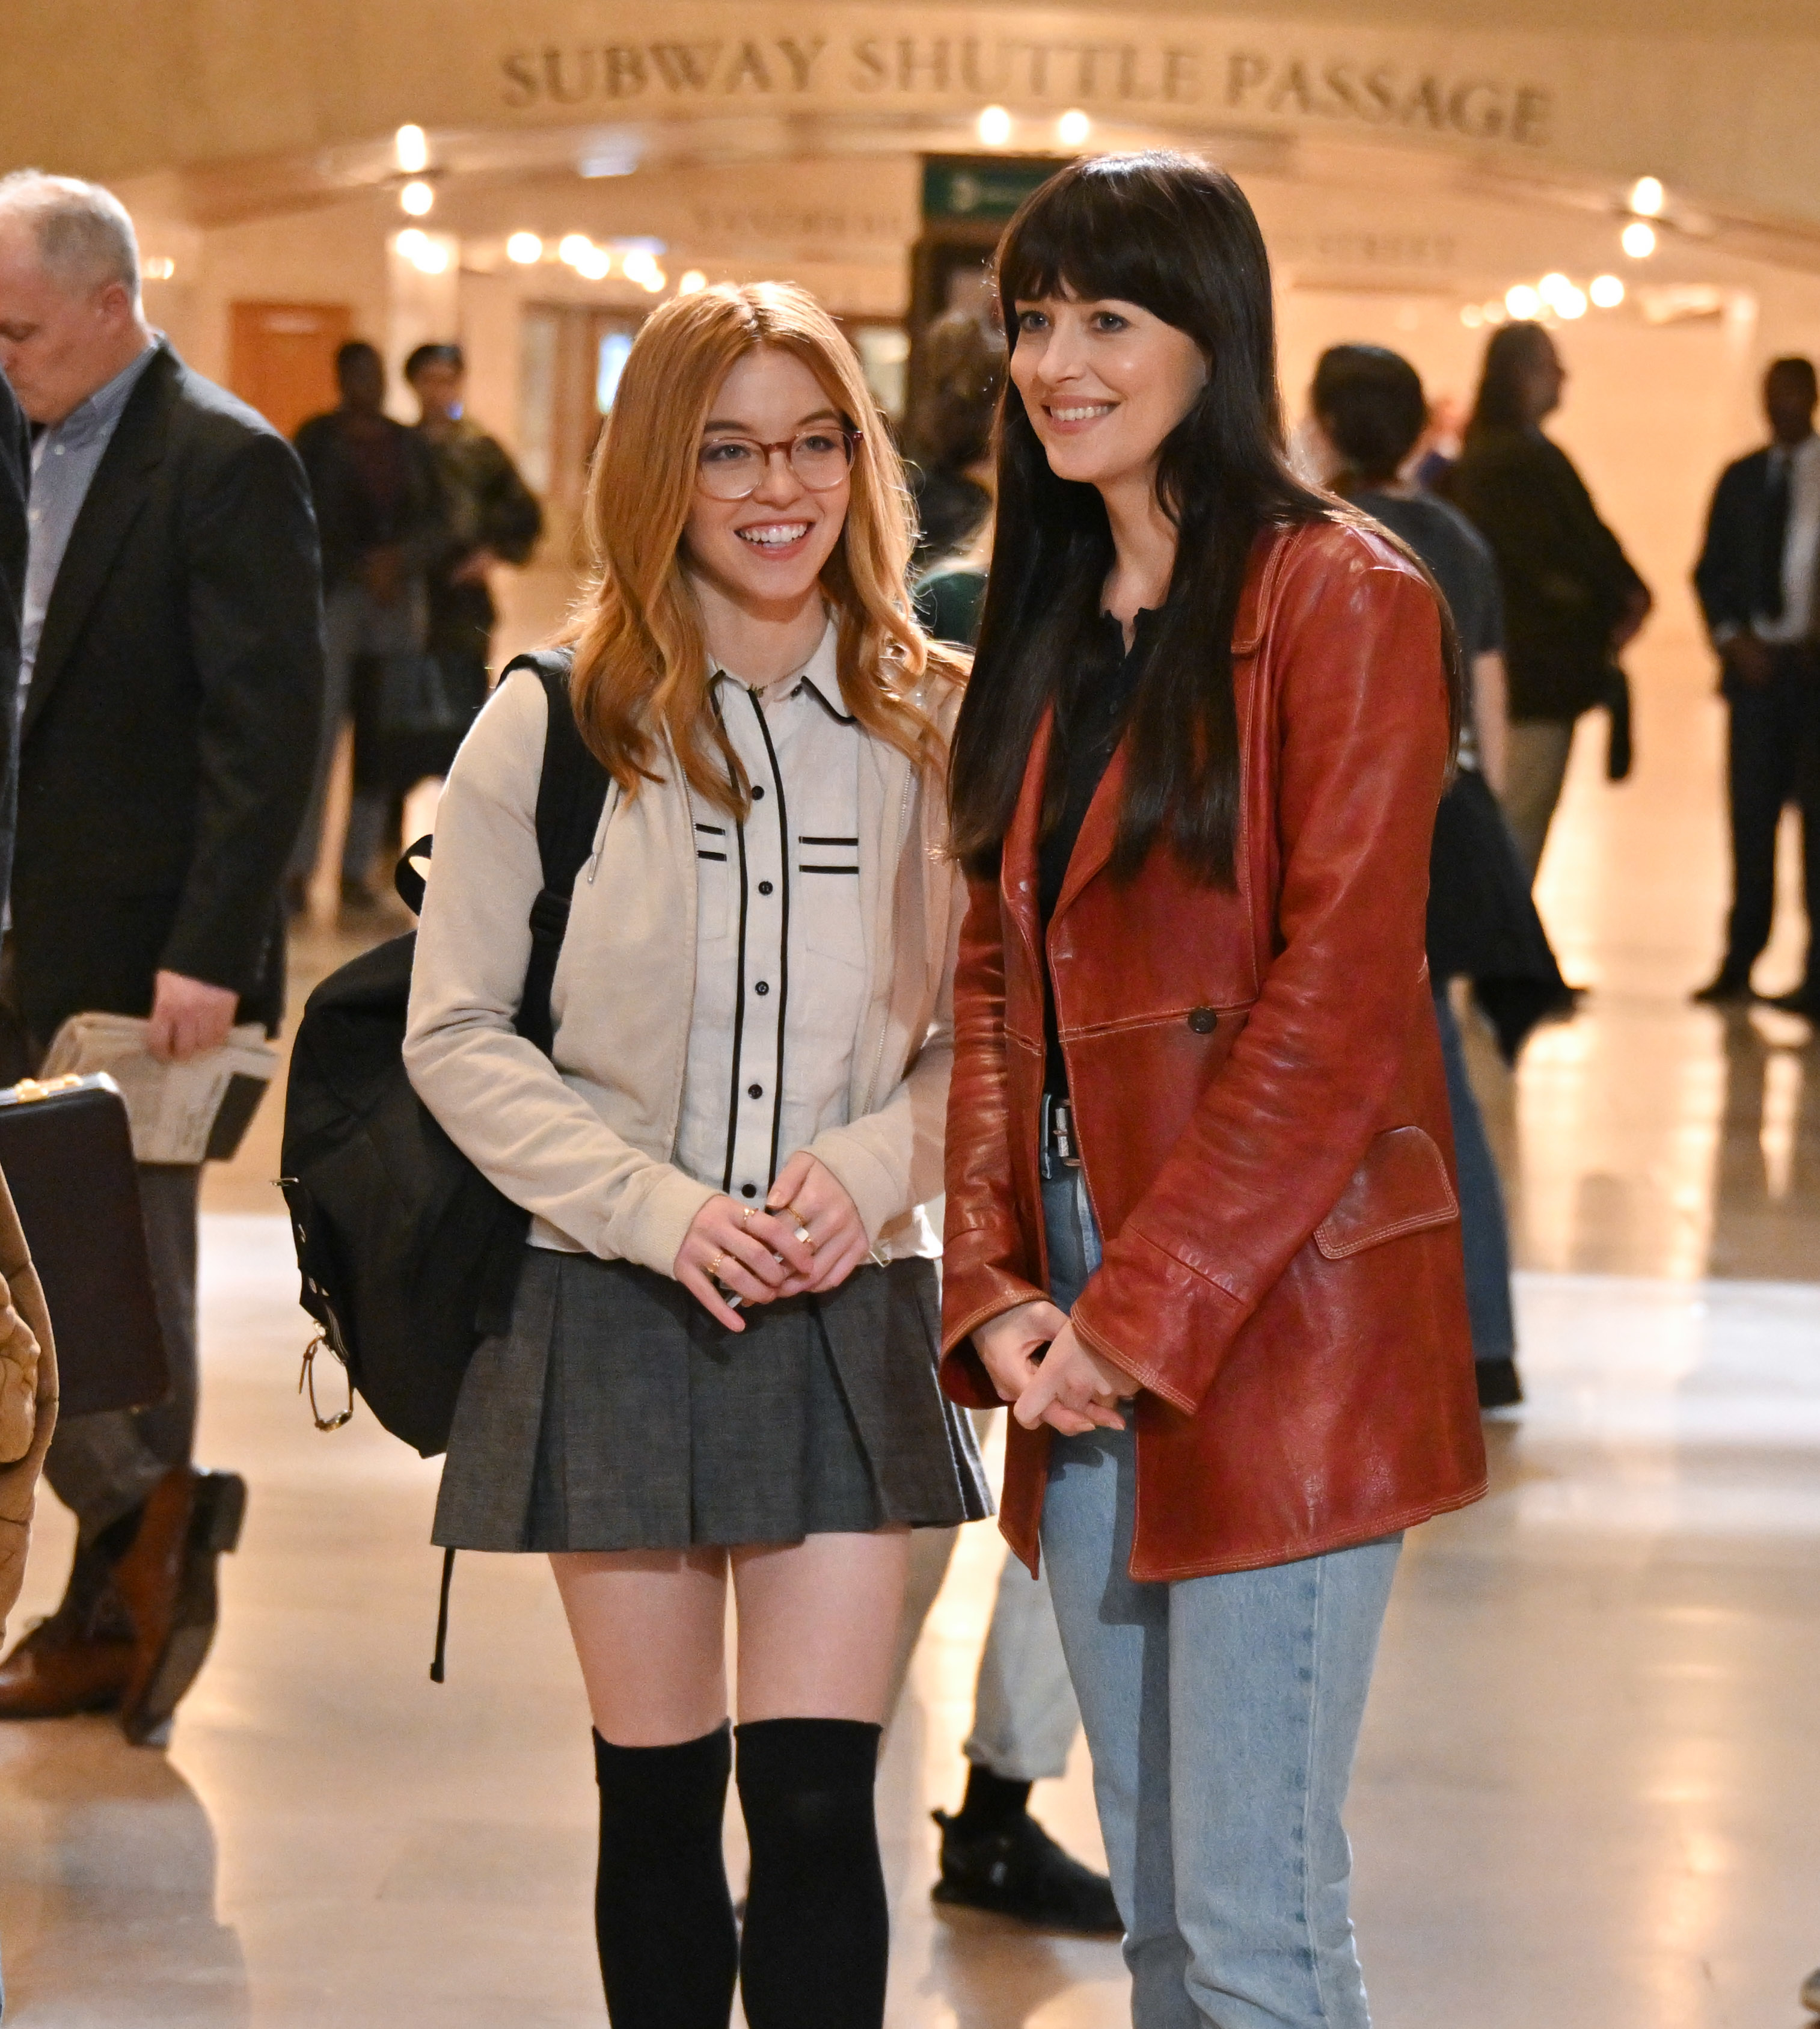 Sydney and Dakota stand in a subway station in a scene from the film